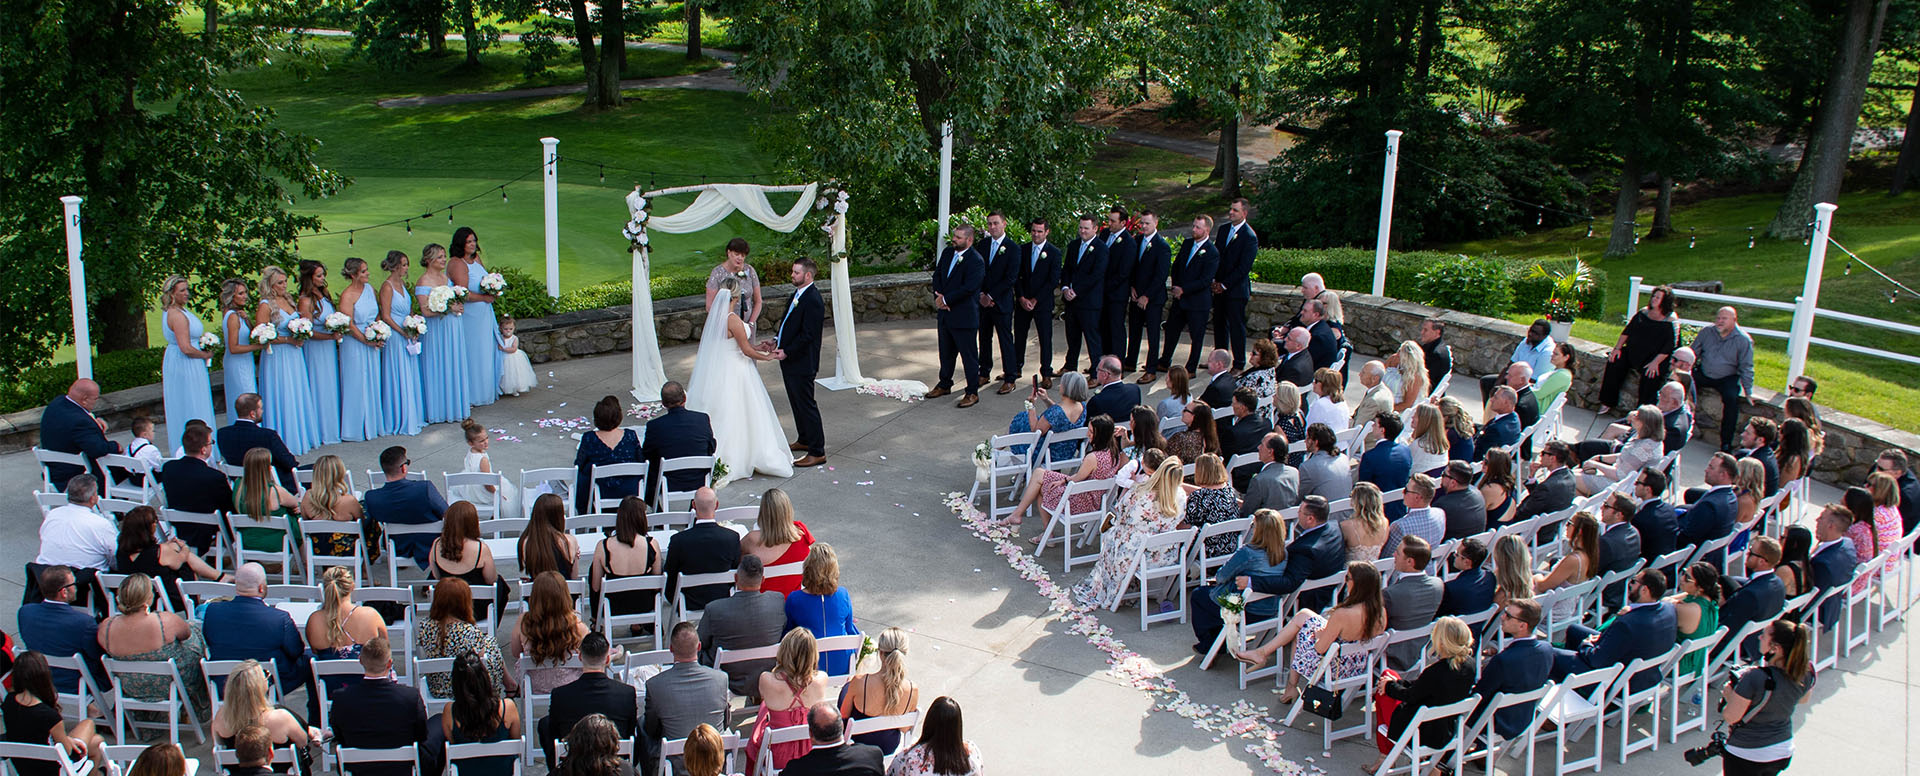 Why a Country Club is the Ideal Wedding Venue